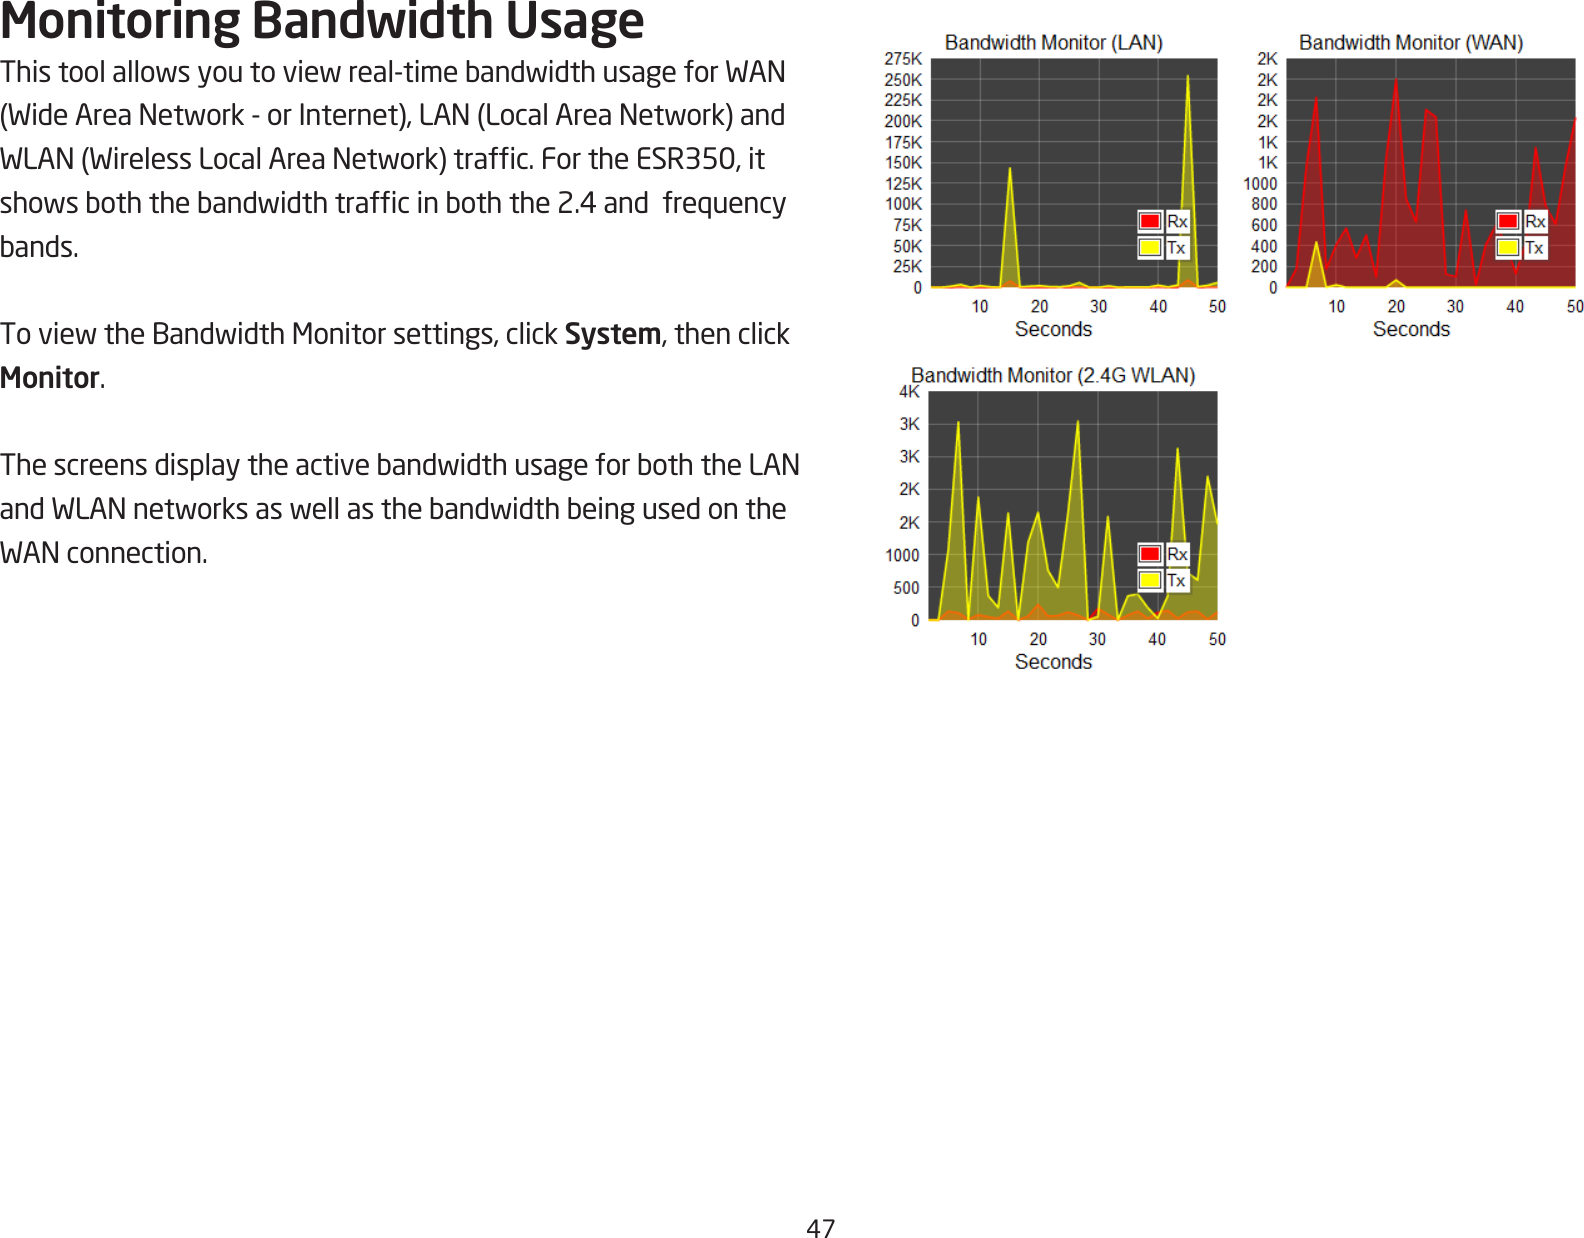 47Monitoring Bandwidth UsageThistoolallowsyoutoviewreal-timebandwidthusageforWAN(WideAreaNetwork-orInternet),LAN(LocalAreaNetwork)andWLAN(WirelessLocalAreaNetwork)trafc.FortheESR350,itshowsboththebandwidthtrafcinboththe2.4andfrequencybands.ToviewtheBandwidthMonitorsettings,clickSystem, then click Monitor.ThescreensdisplaytheactivebandwidthusageforboththeLANandWLANnetworksaswellasthebandwidthbeingusedontheWANconnection.